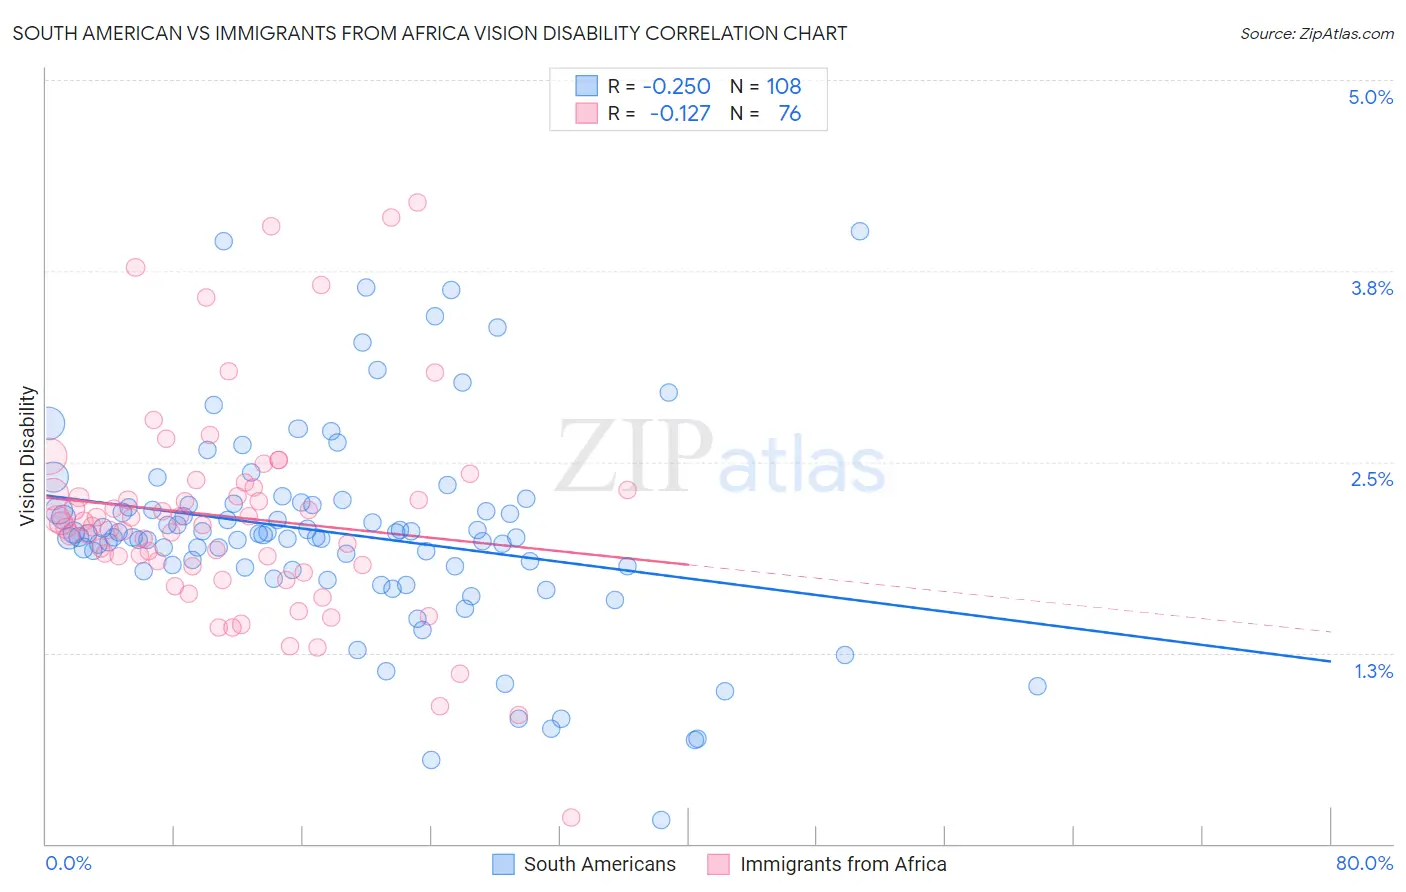 South American vs Immigrants from Africa Vision Disability